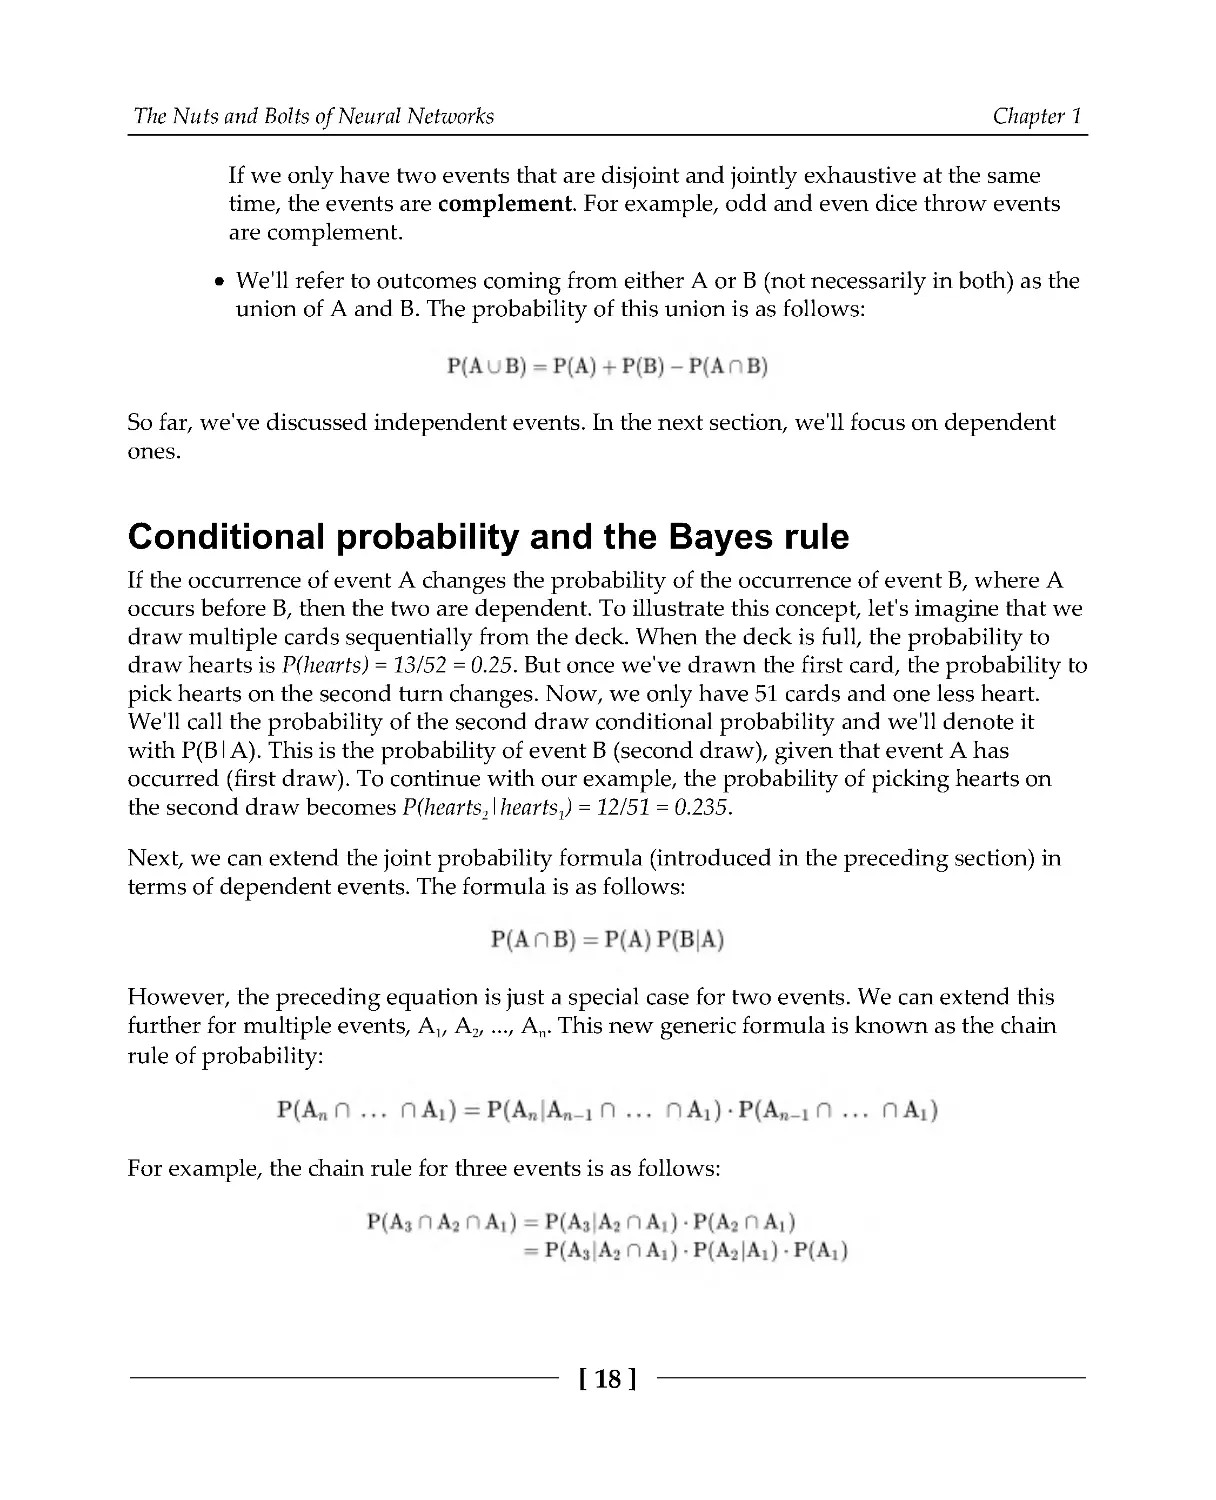 Conditional probability and the Bayes rule